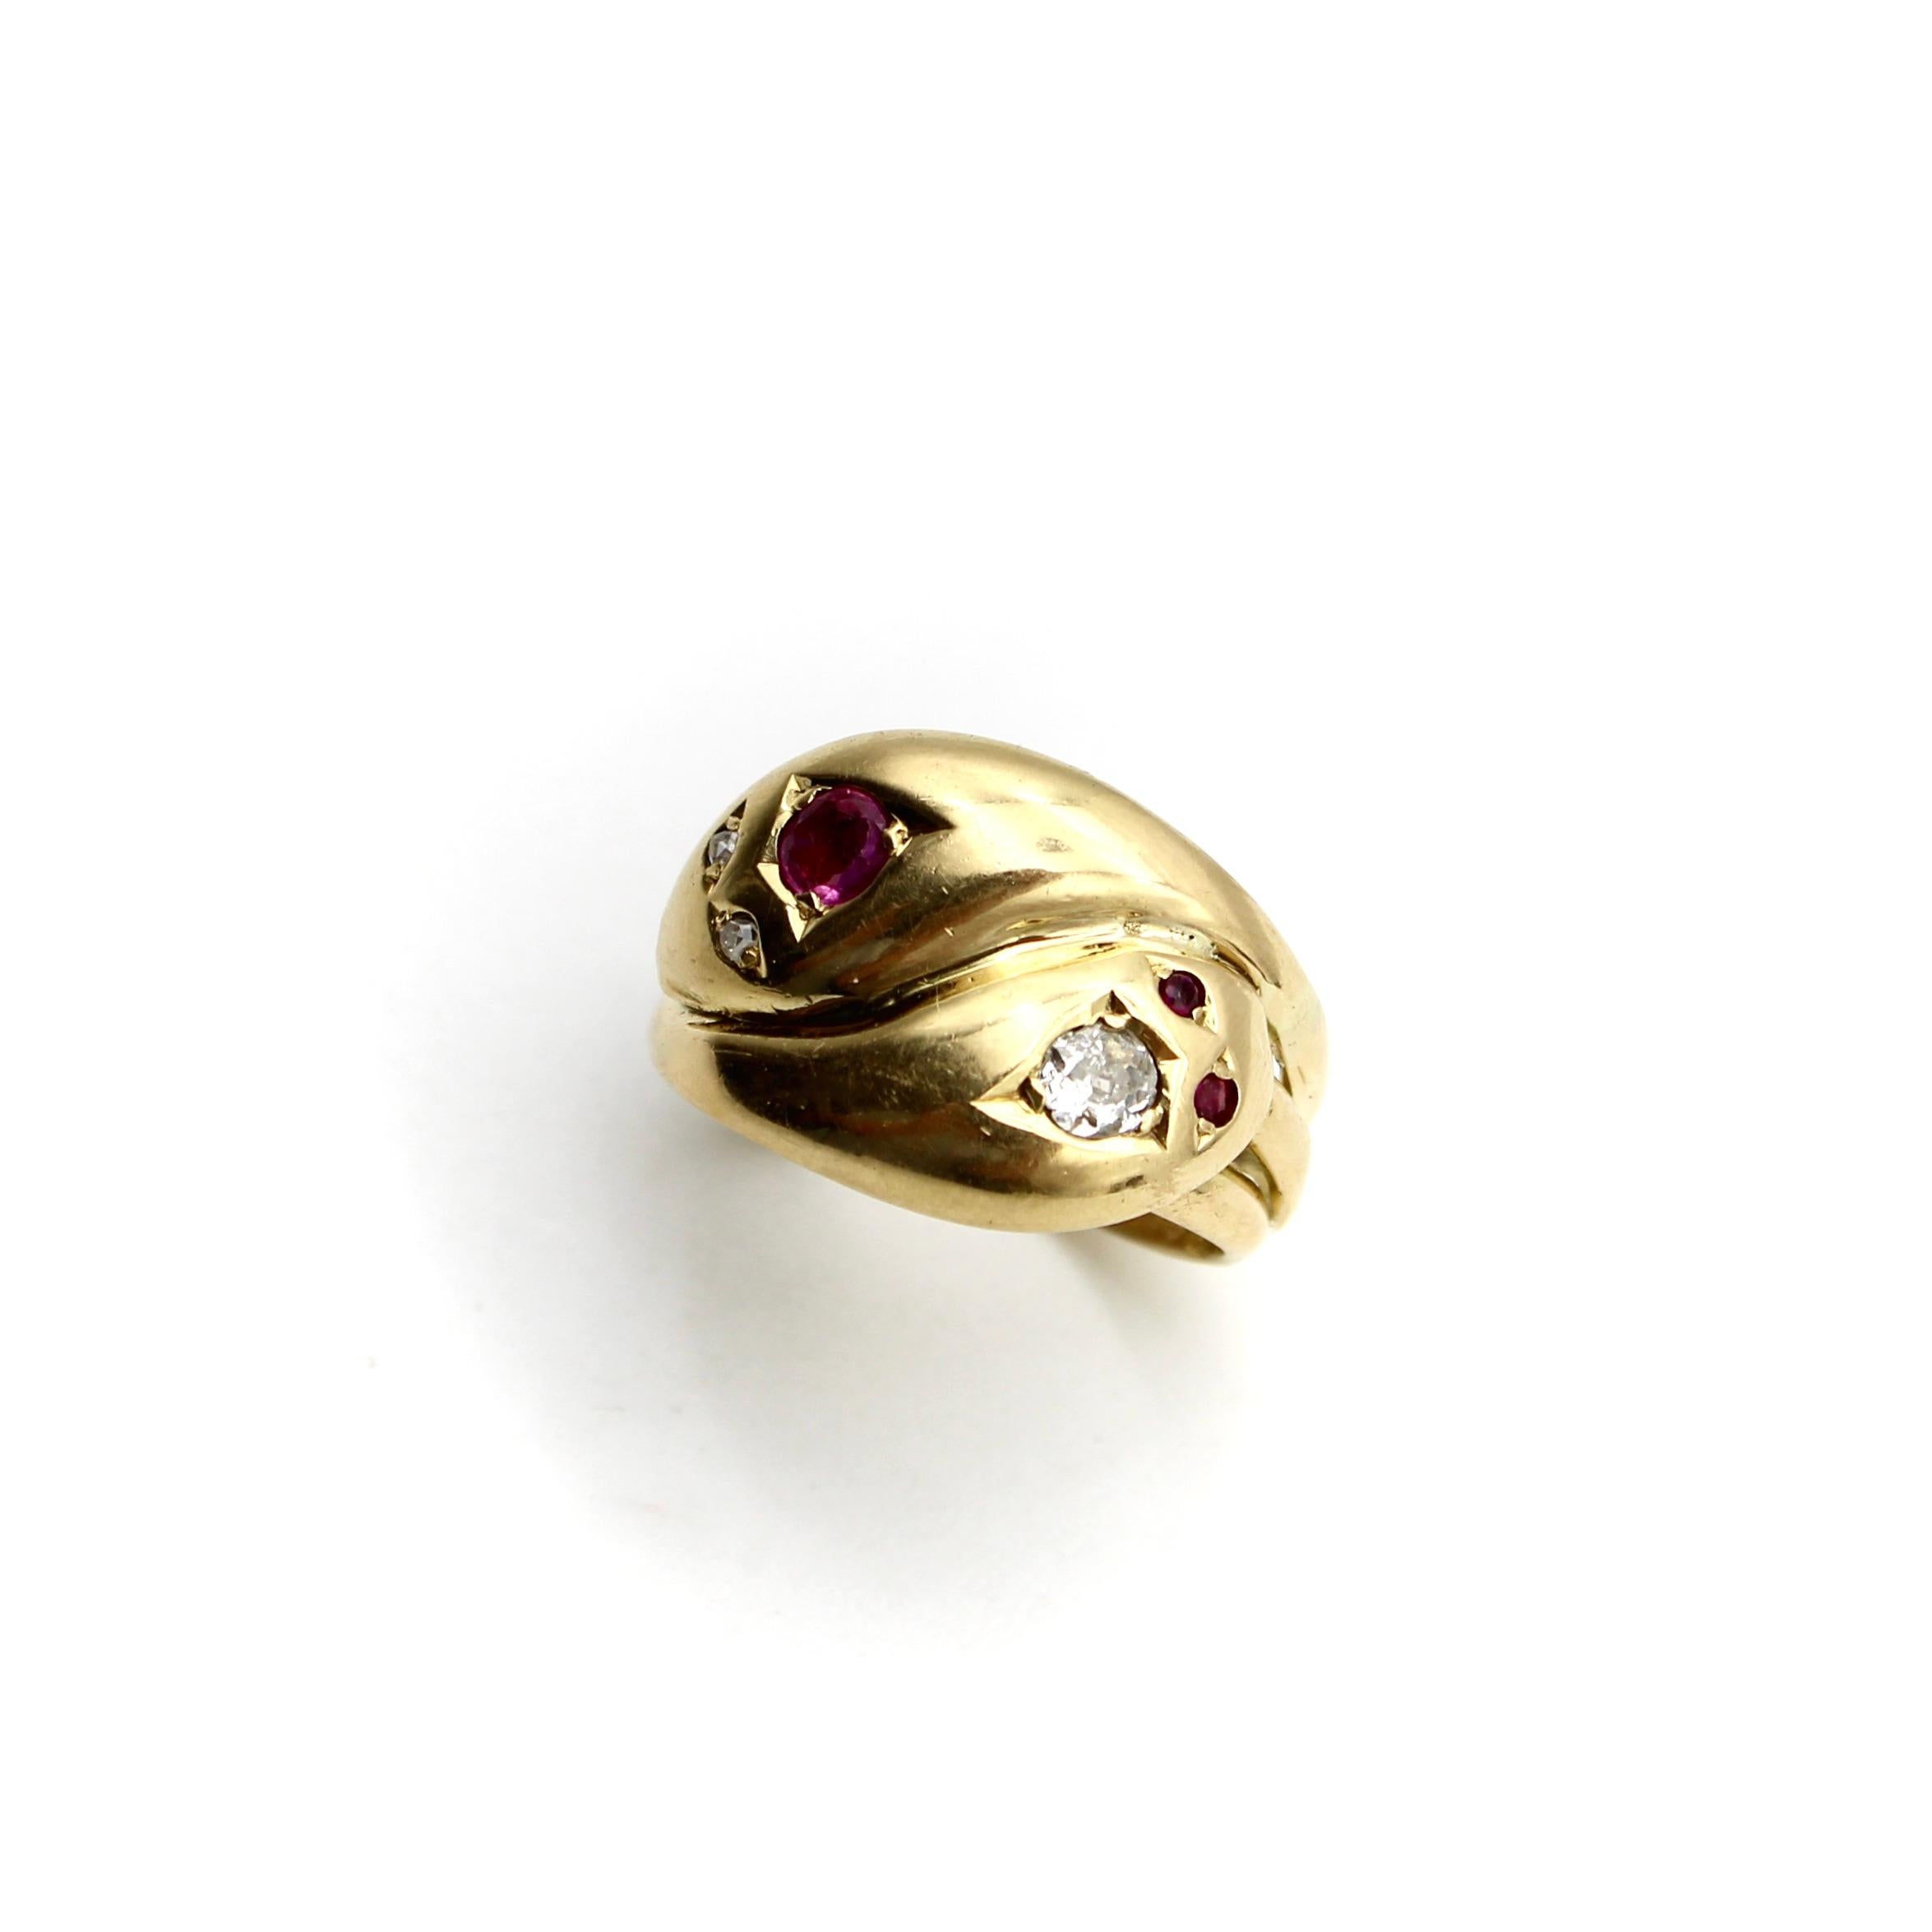 Circa 1917, the heads of two snakes intertwine in this 18k gold Edwardian ring. The snake heads mirror each other: one snake has diamond eyes and a large natural ruby on its back, the other snake has the reverse with ruby eyes and a large Old Mine